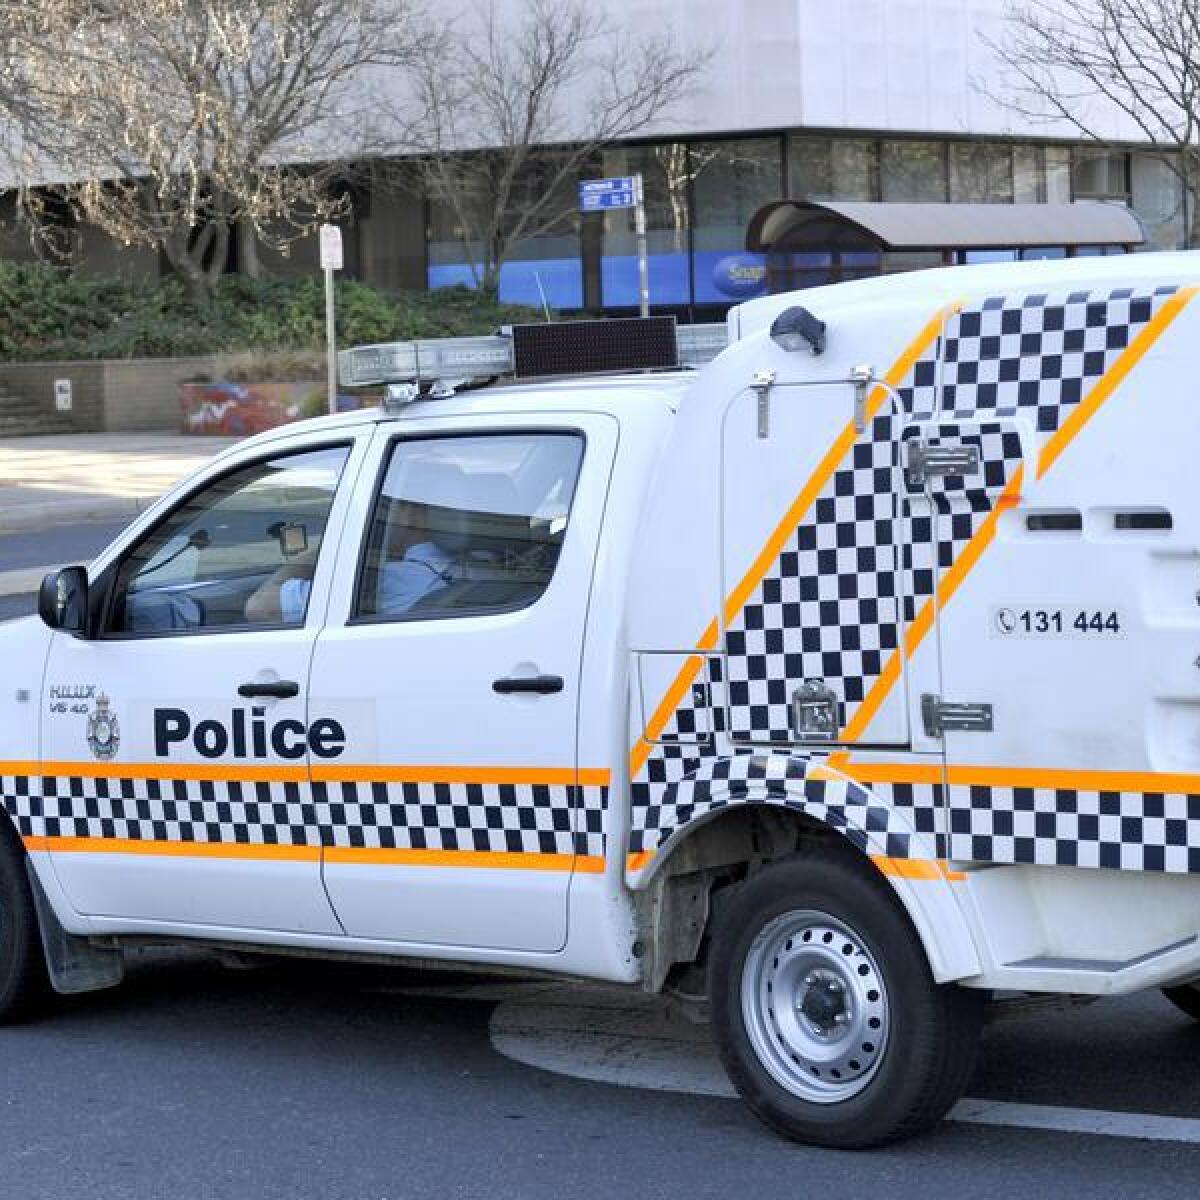 ACT Police vehicles in Canberra,